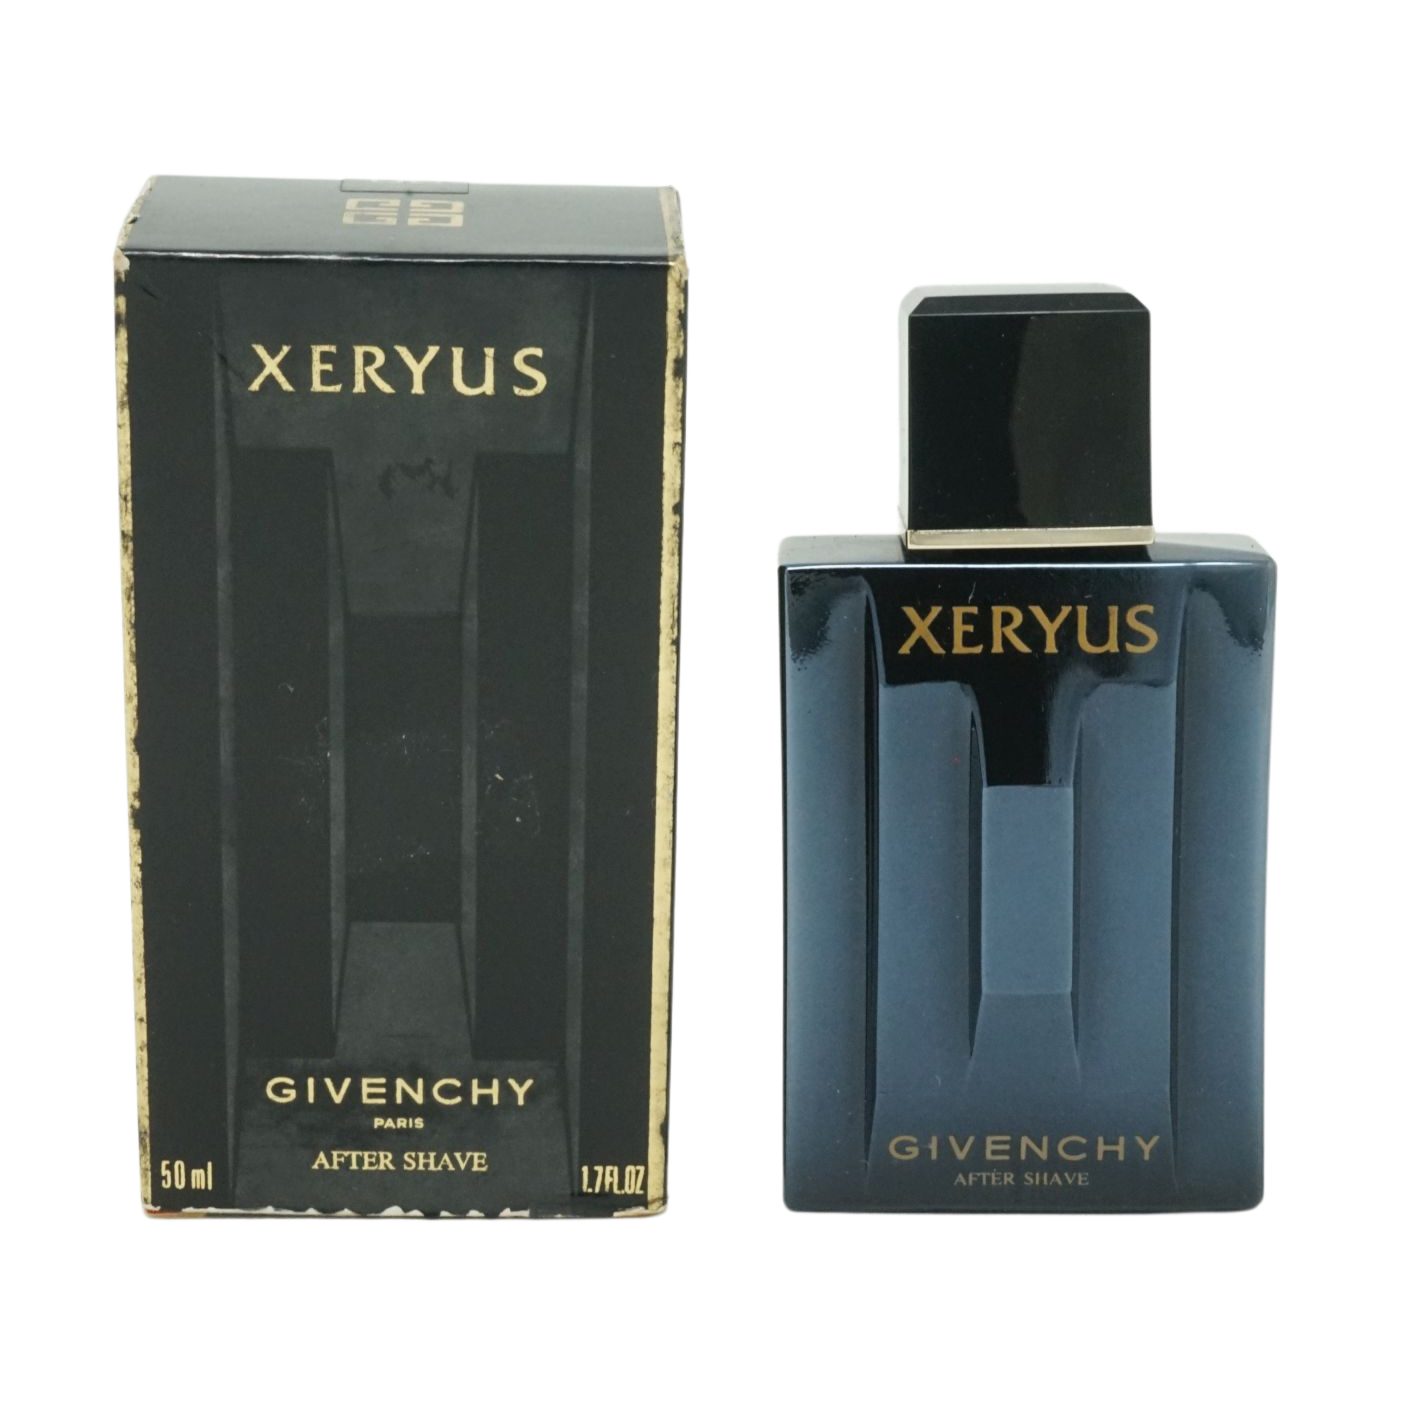 Luxus-Versandhandel GIVENCHY After-Shave 50ml After Shave Paris Xeryus Givenchy